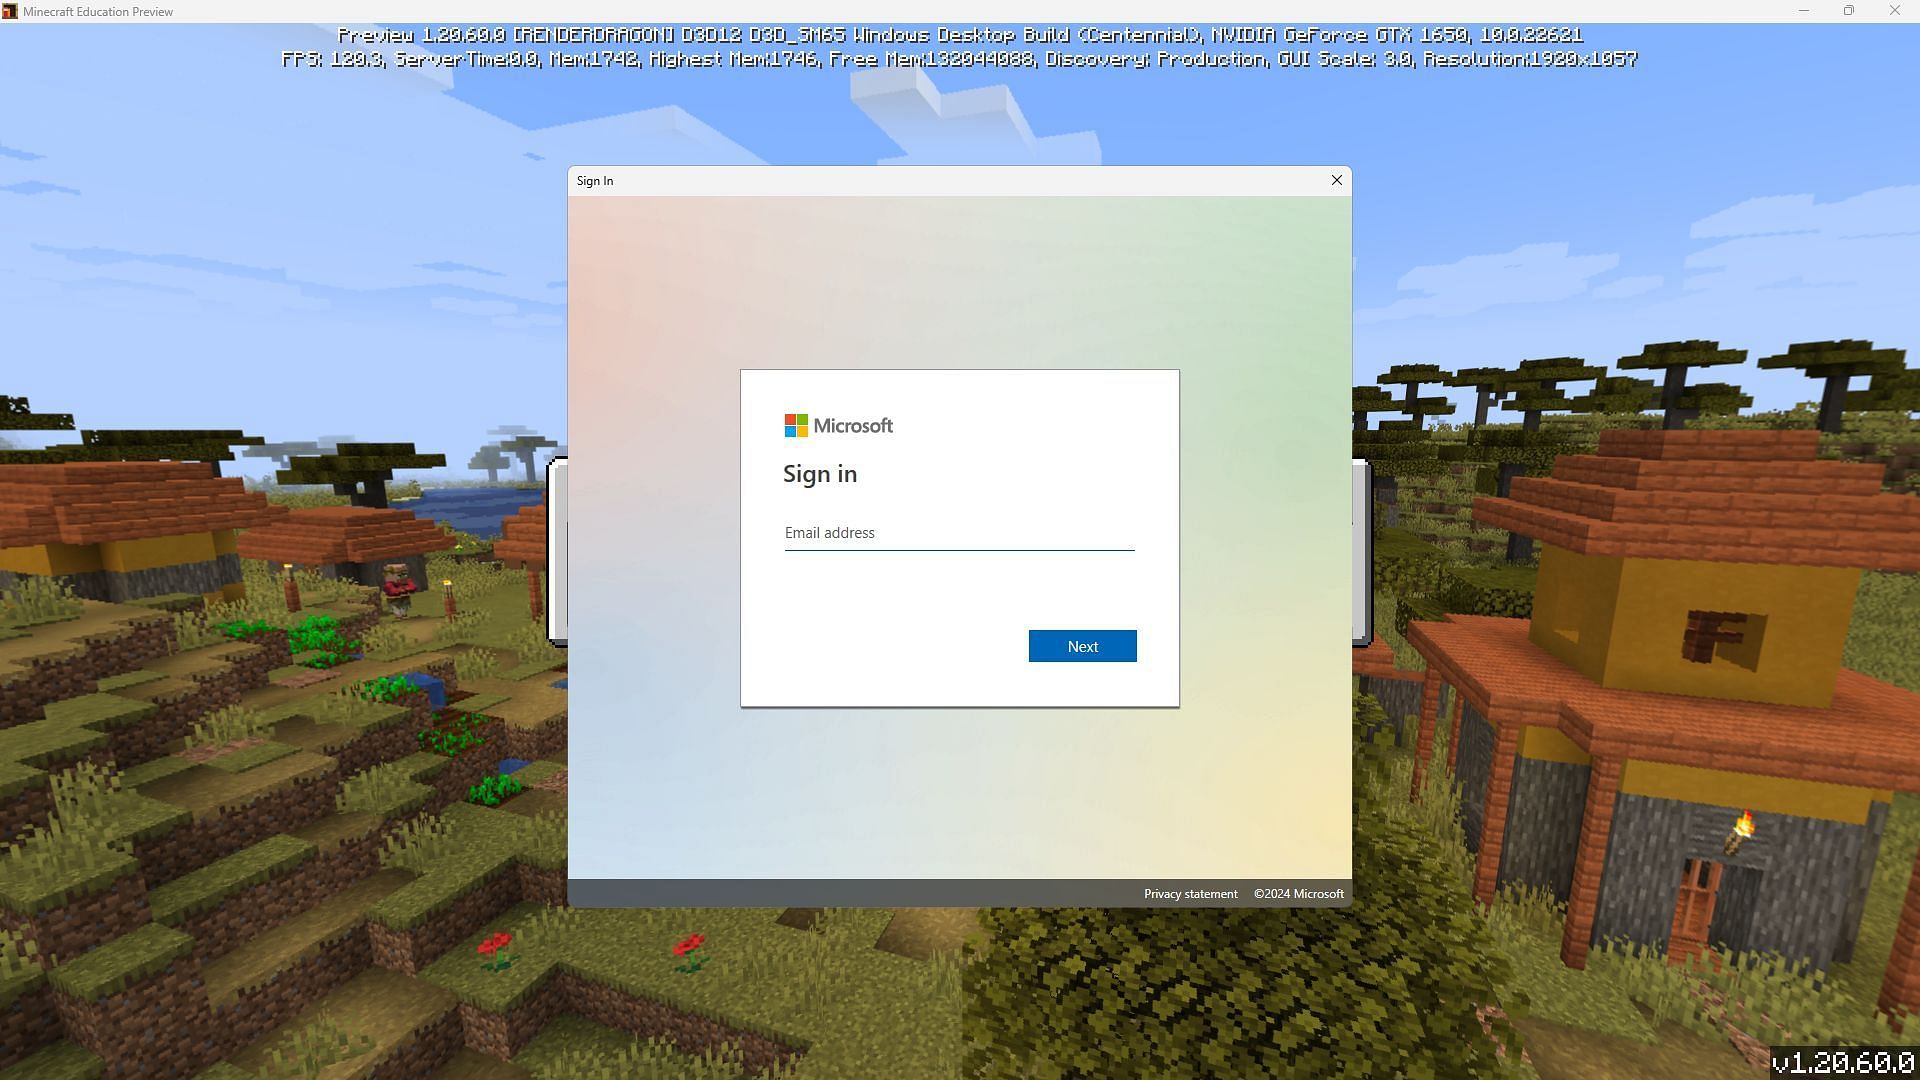 The Education Preview will directly ask for a school or work account with the official license (Image via Mojang)